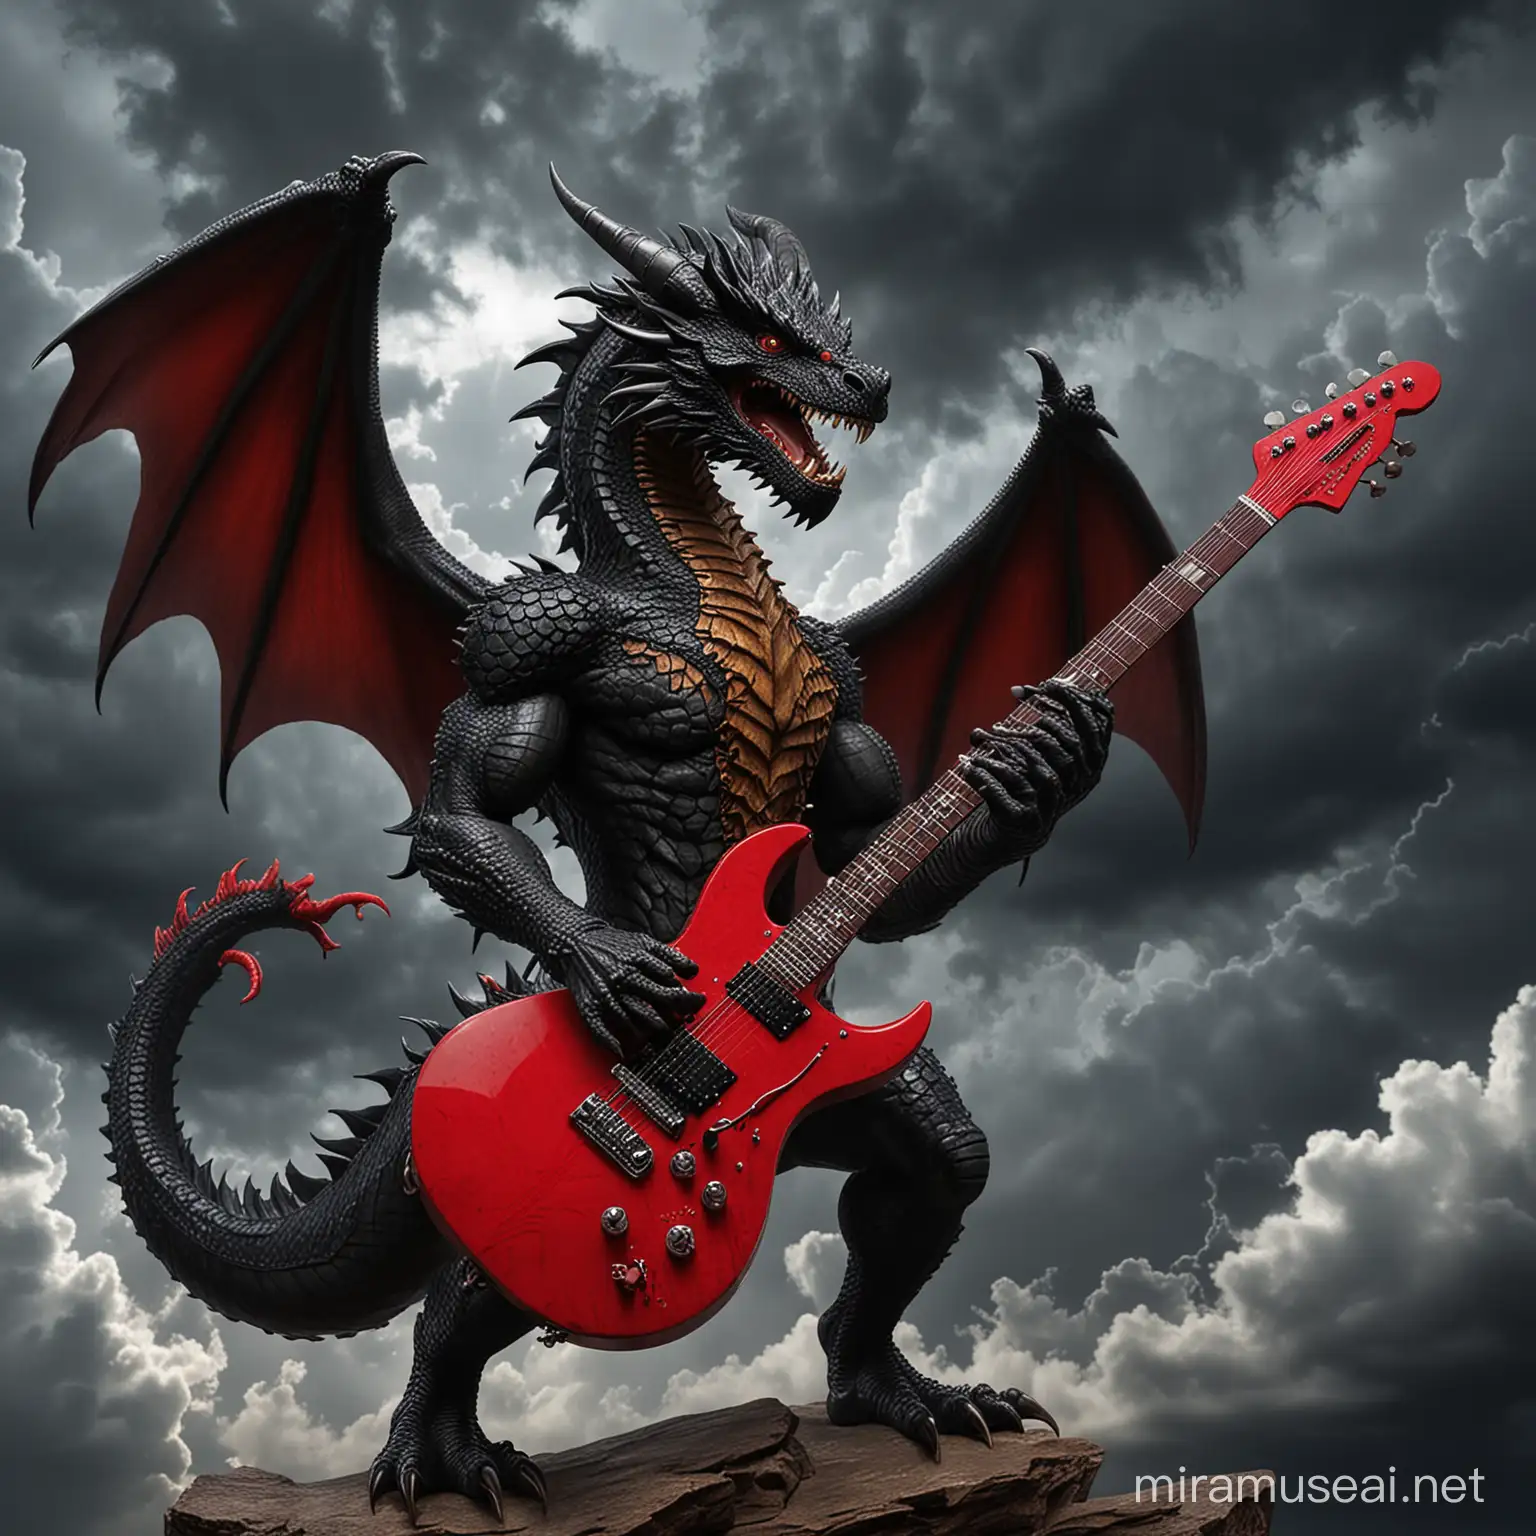 Black Dragon Playing RedPointed Electric Guitar Amid Stormy Sky